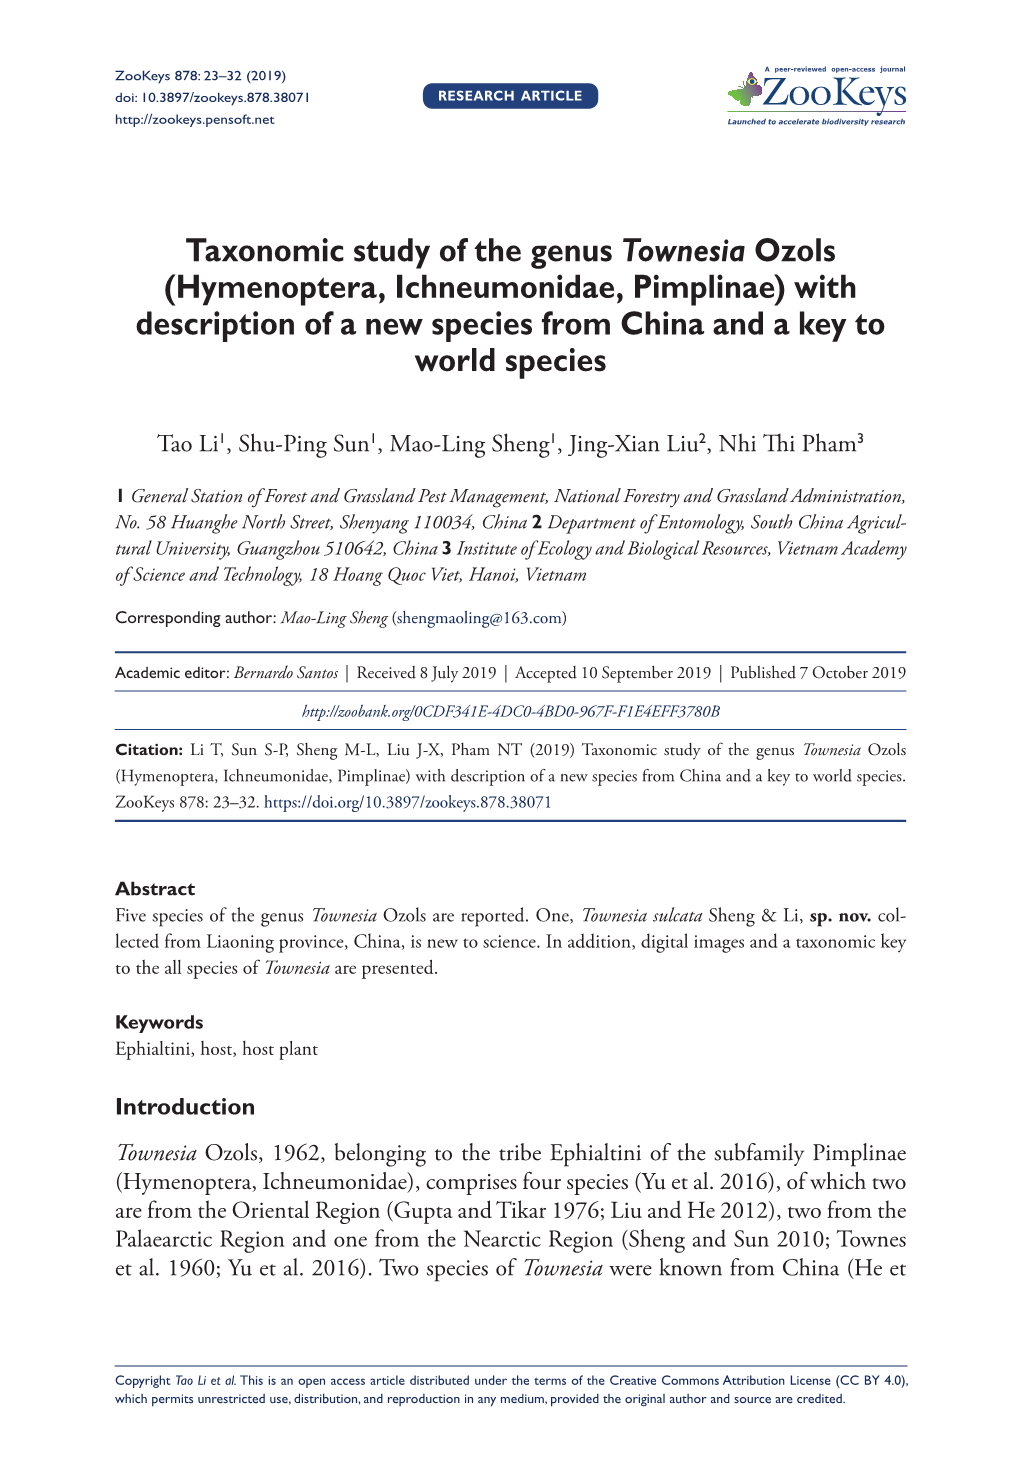 Taxonomic Study of the Genus Townesia Ozols (Hymenoptera, Ichneumonidae, Pimplinae) with Description of a New Species from China and a Key to World Species